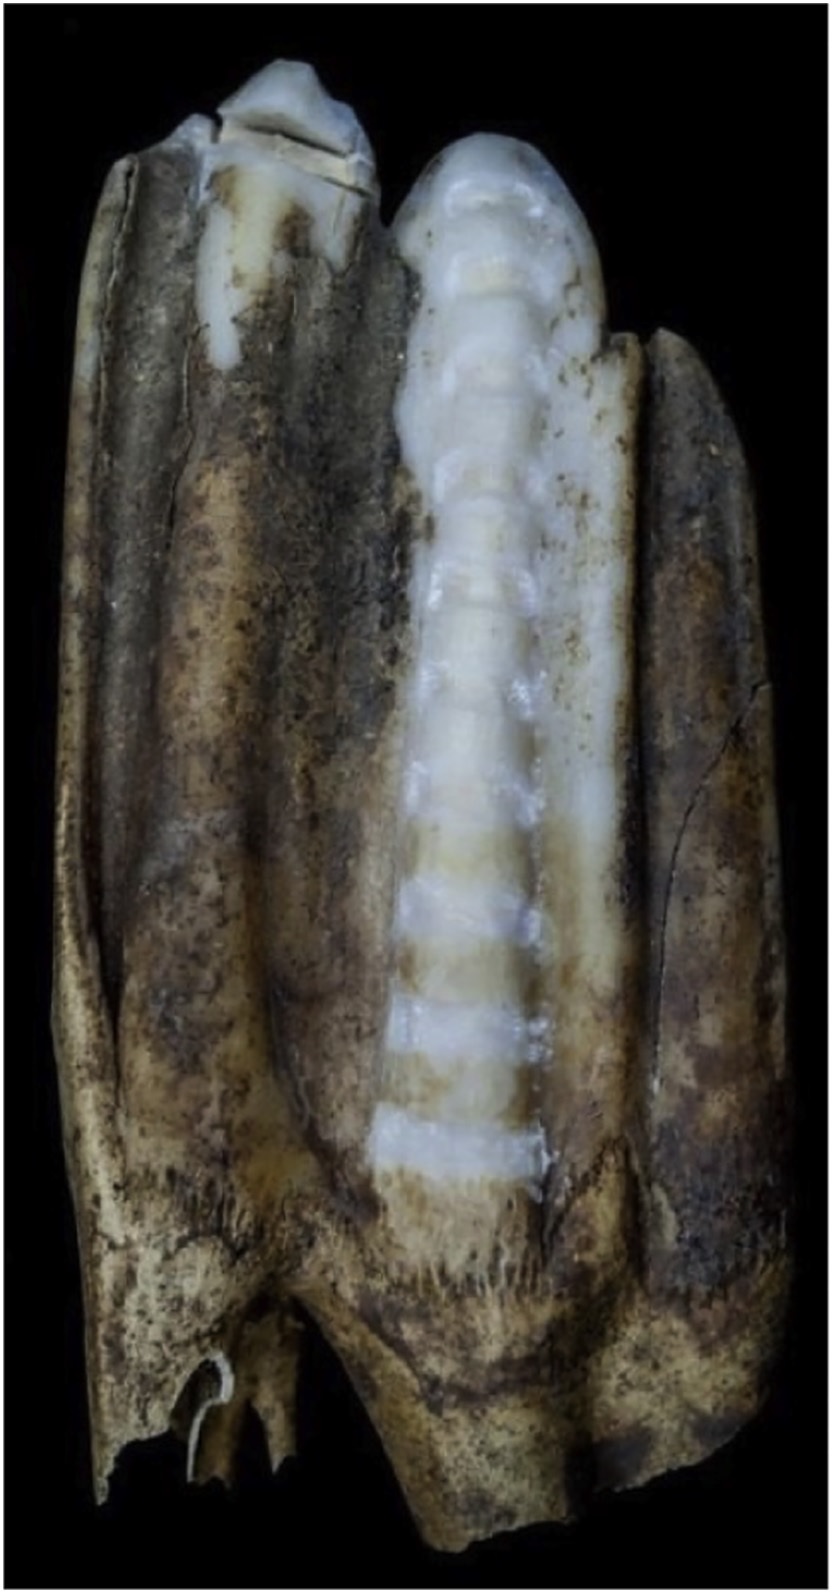 Close up photo of a cow tooth with samples removed